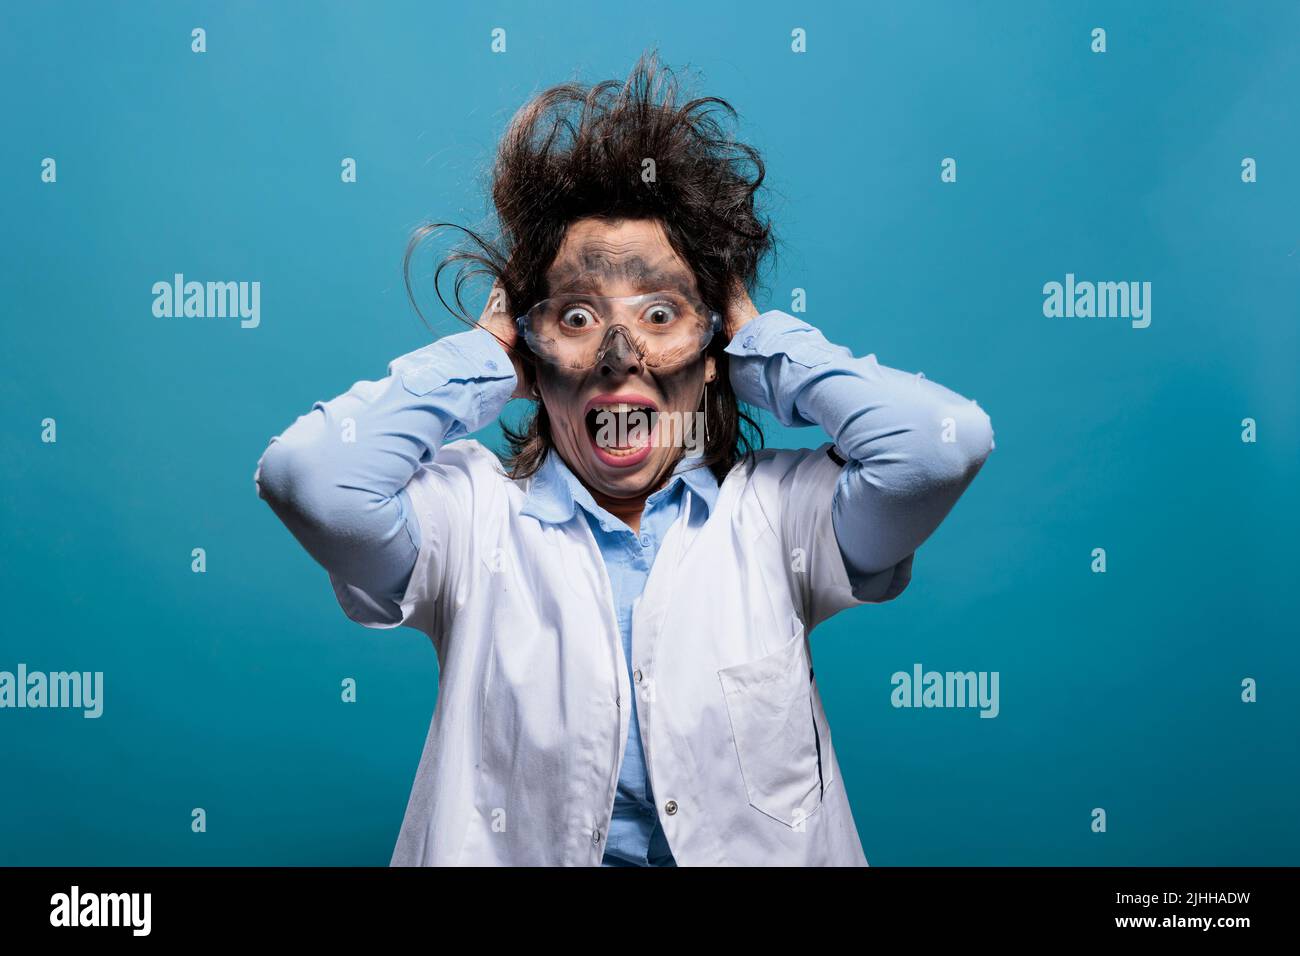 Psycho and scared mad chemist screaming in panic after dangerous chemical explosion and failed scientific experiment. Weirdo scientist with messy hair and dirty face shouting on blue background. Stock Photo